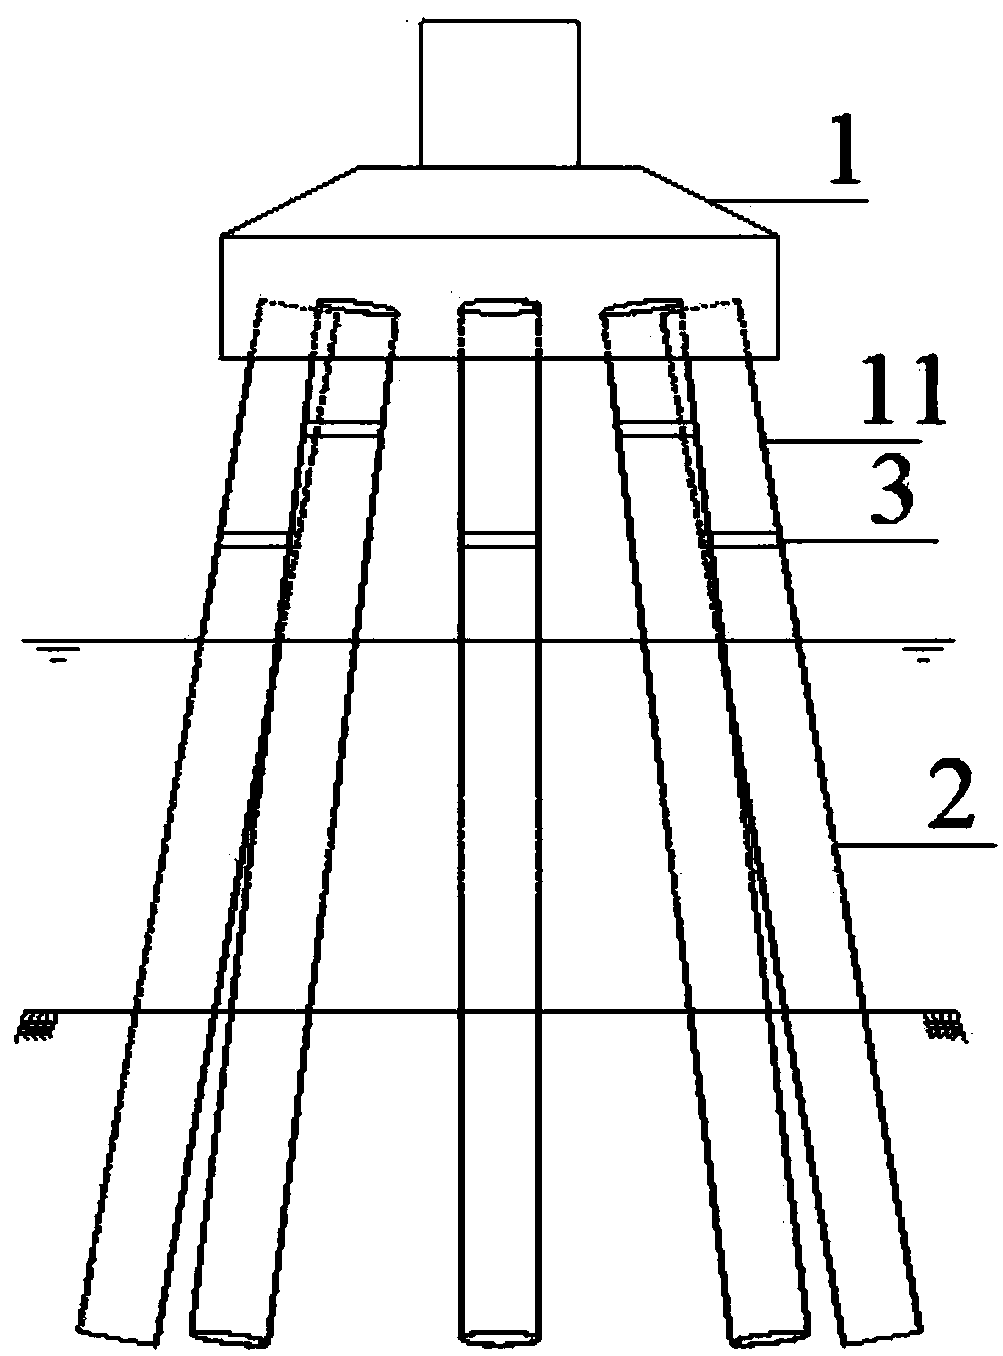 Offshore fan prefabricated high pile bearing platform foundation structure and installation method